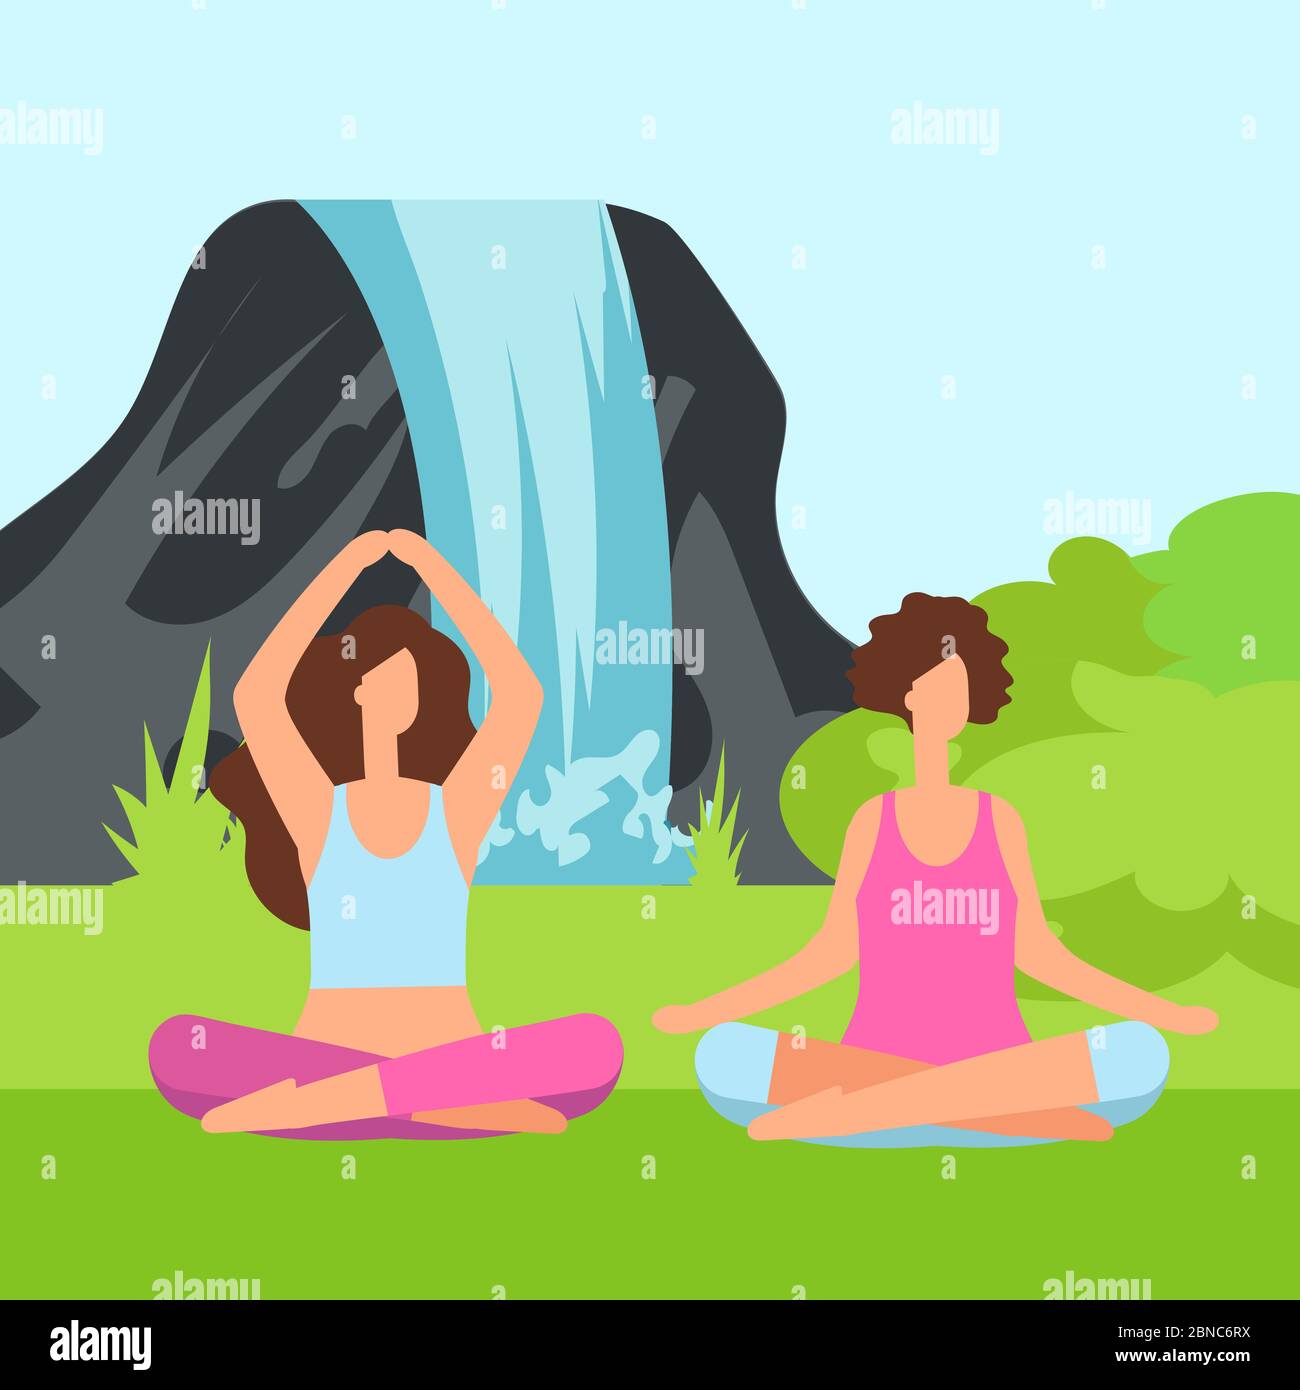 Two meditation women on the nature with green bush and waterfall. Yoga meditation, healthy female in lotus pose illustration Stock Vector